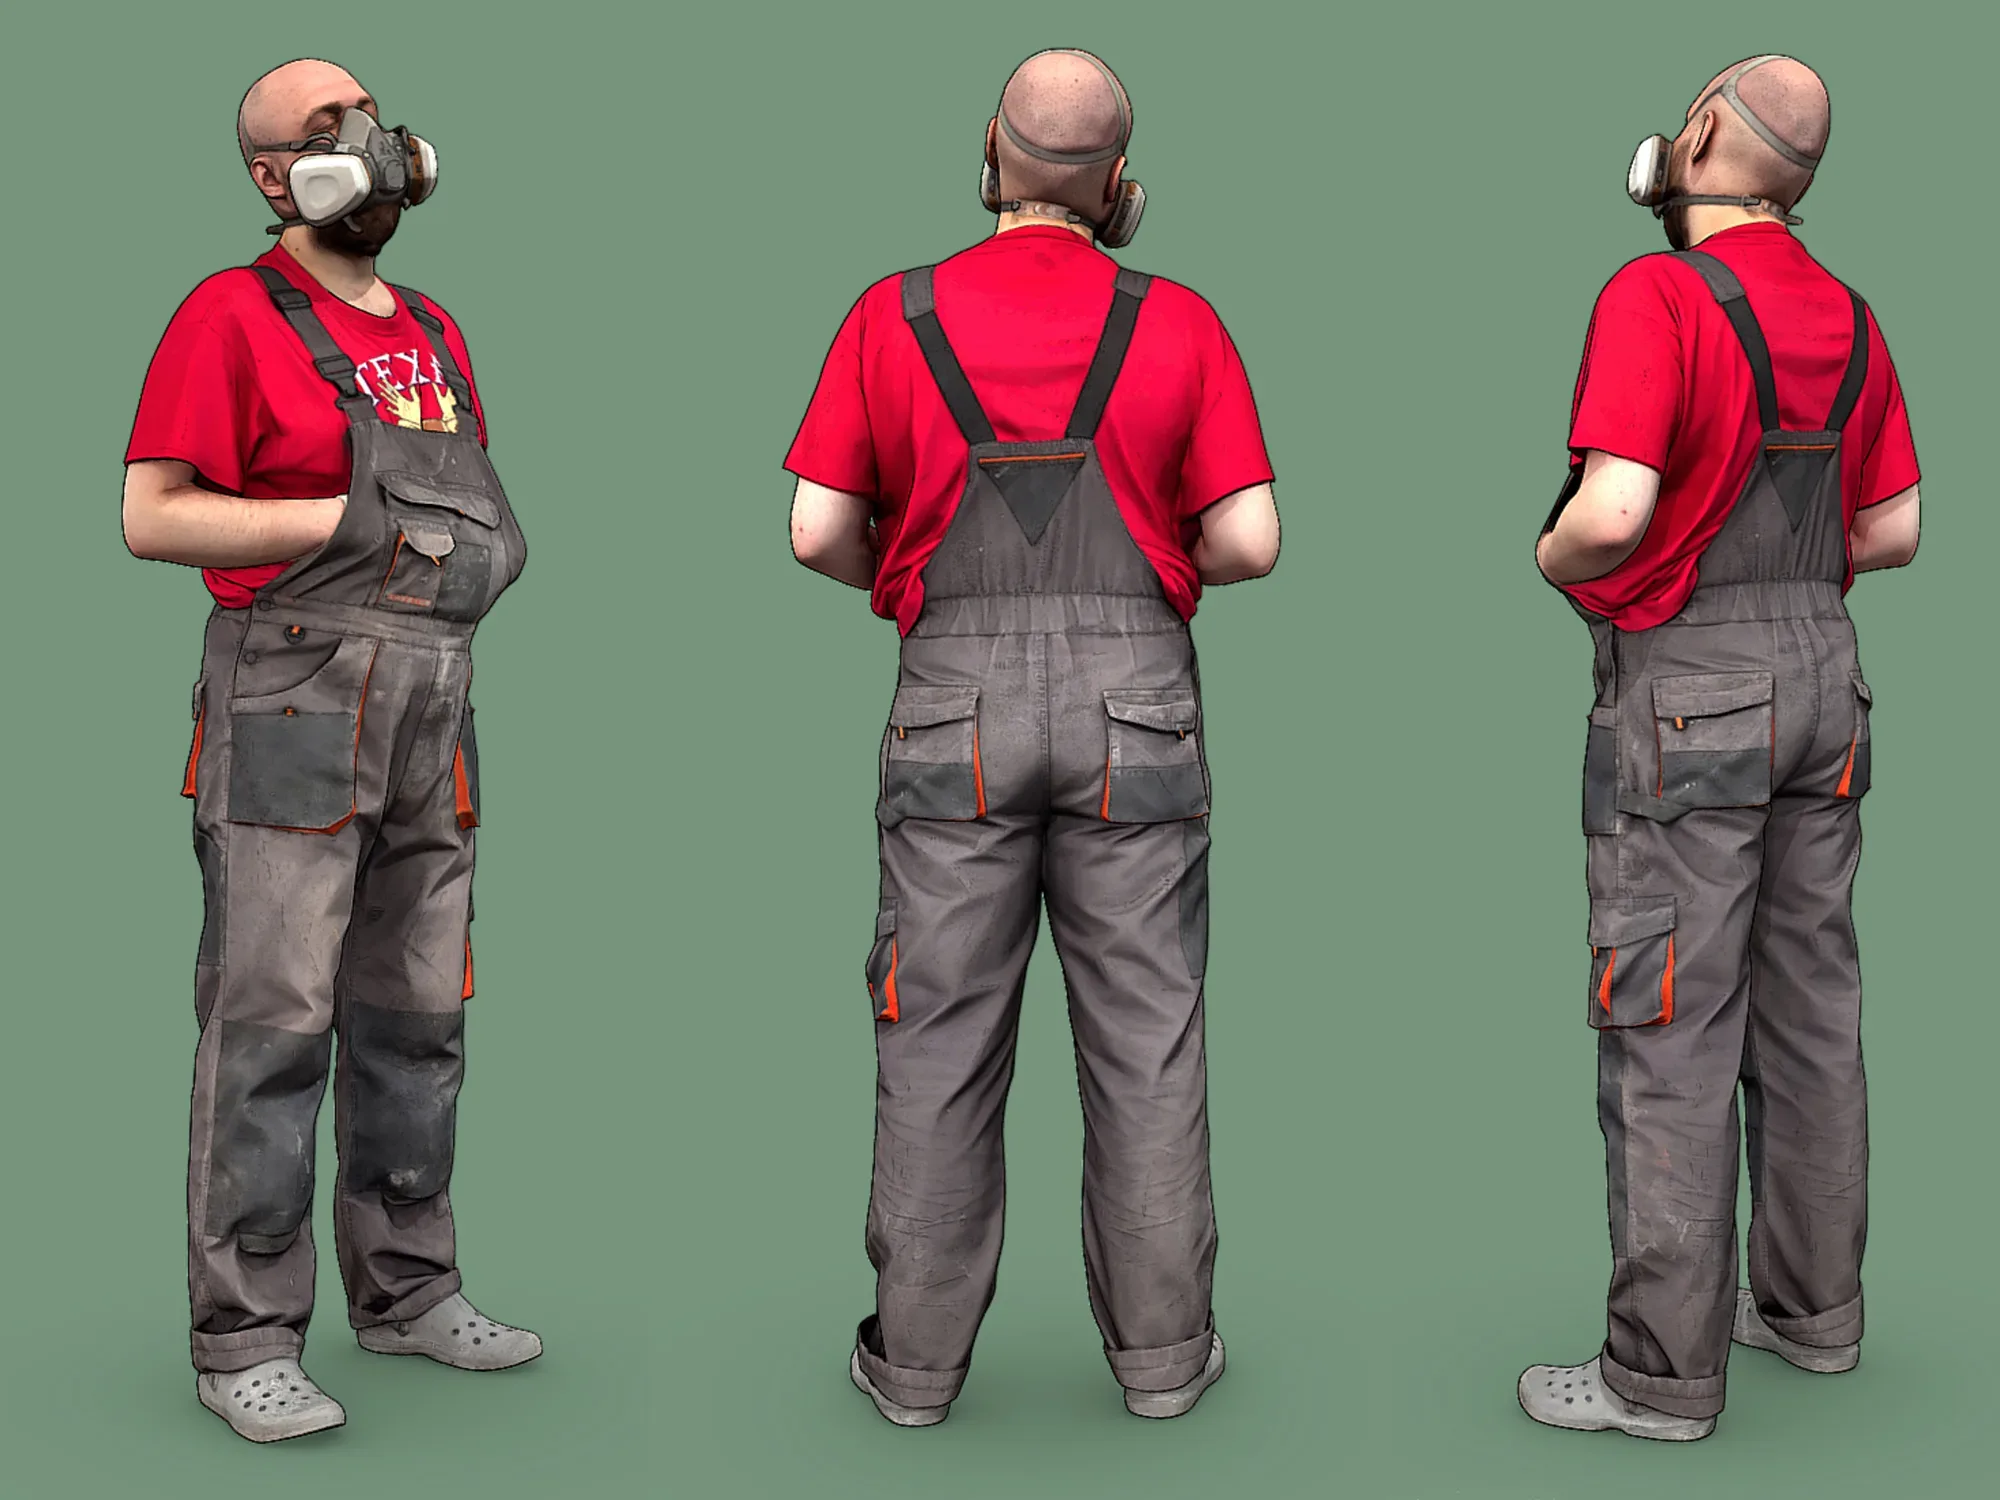 Stylized Bald Worker in a Respirator model